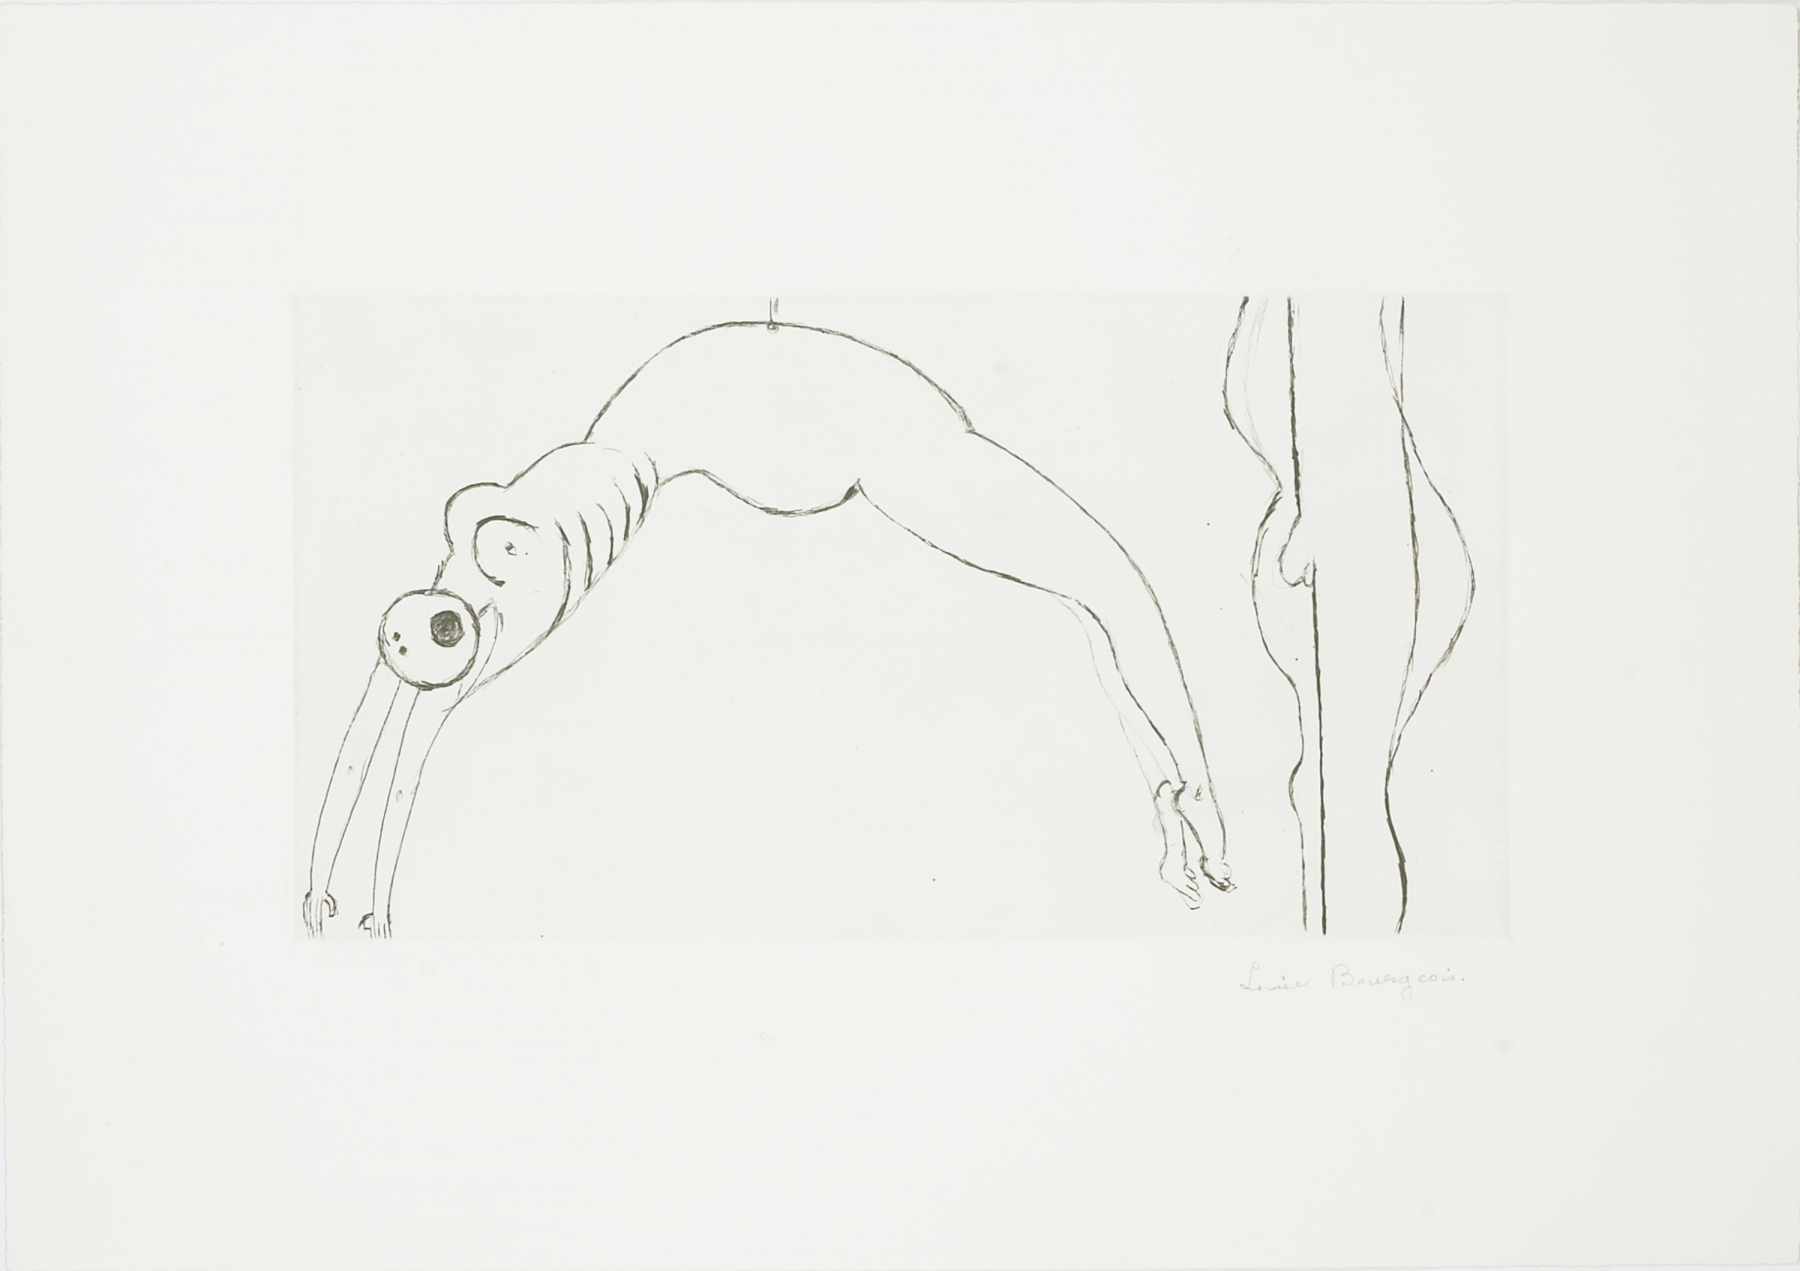 Arched Figure, 1993
Drypoint
15 5/8 x 22 inches (39.69 x 55.88 cm)
Edition of 50 + proofs

Inquire
&nbsp;